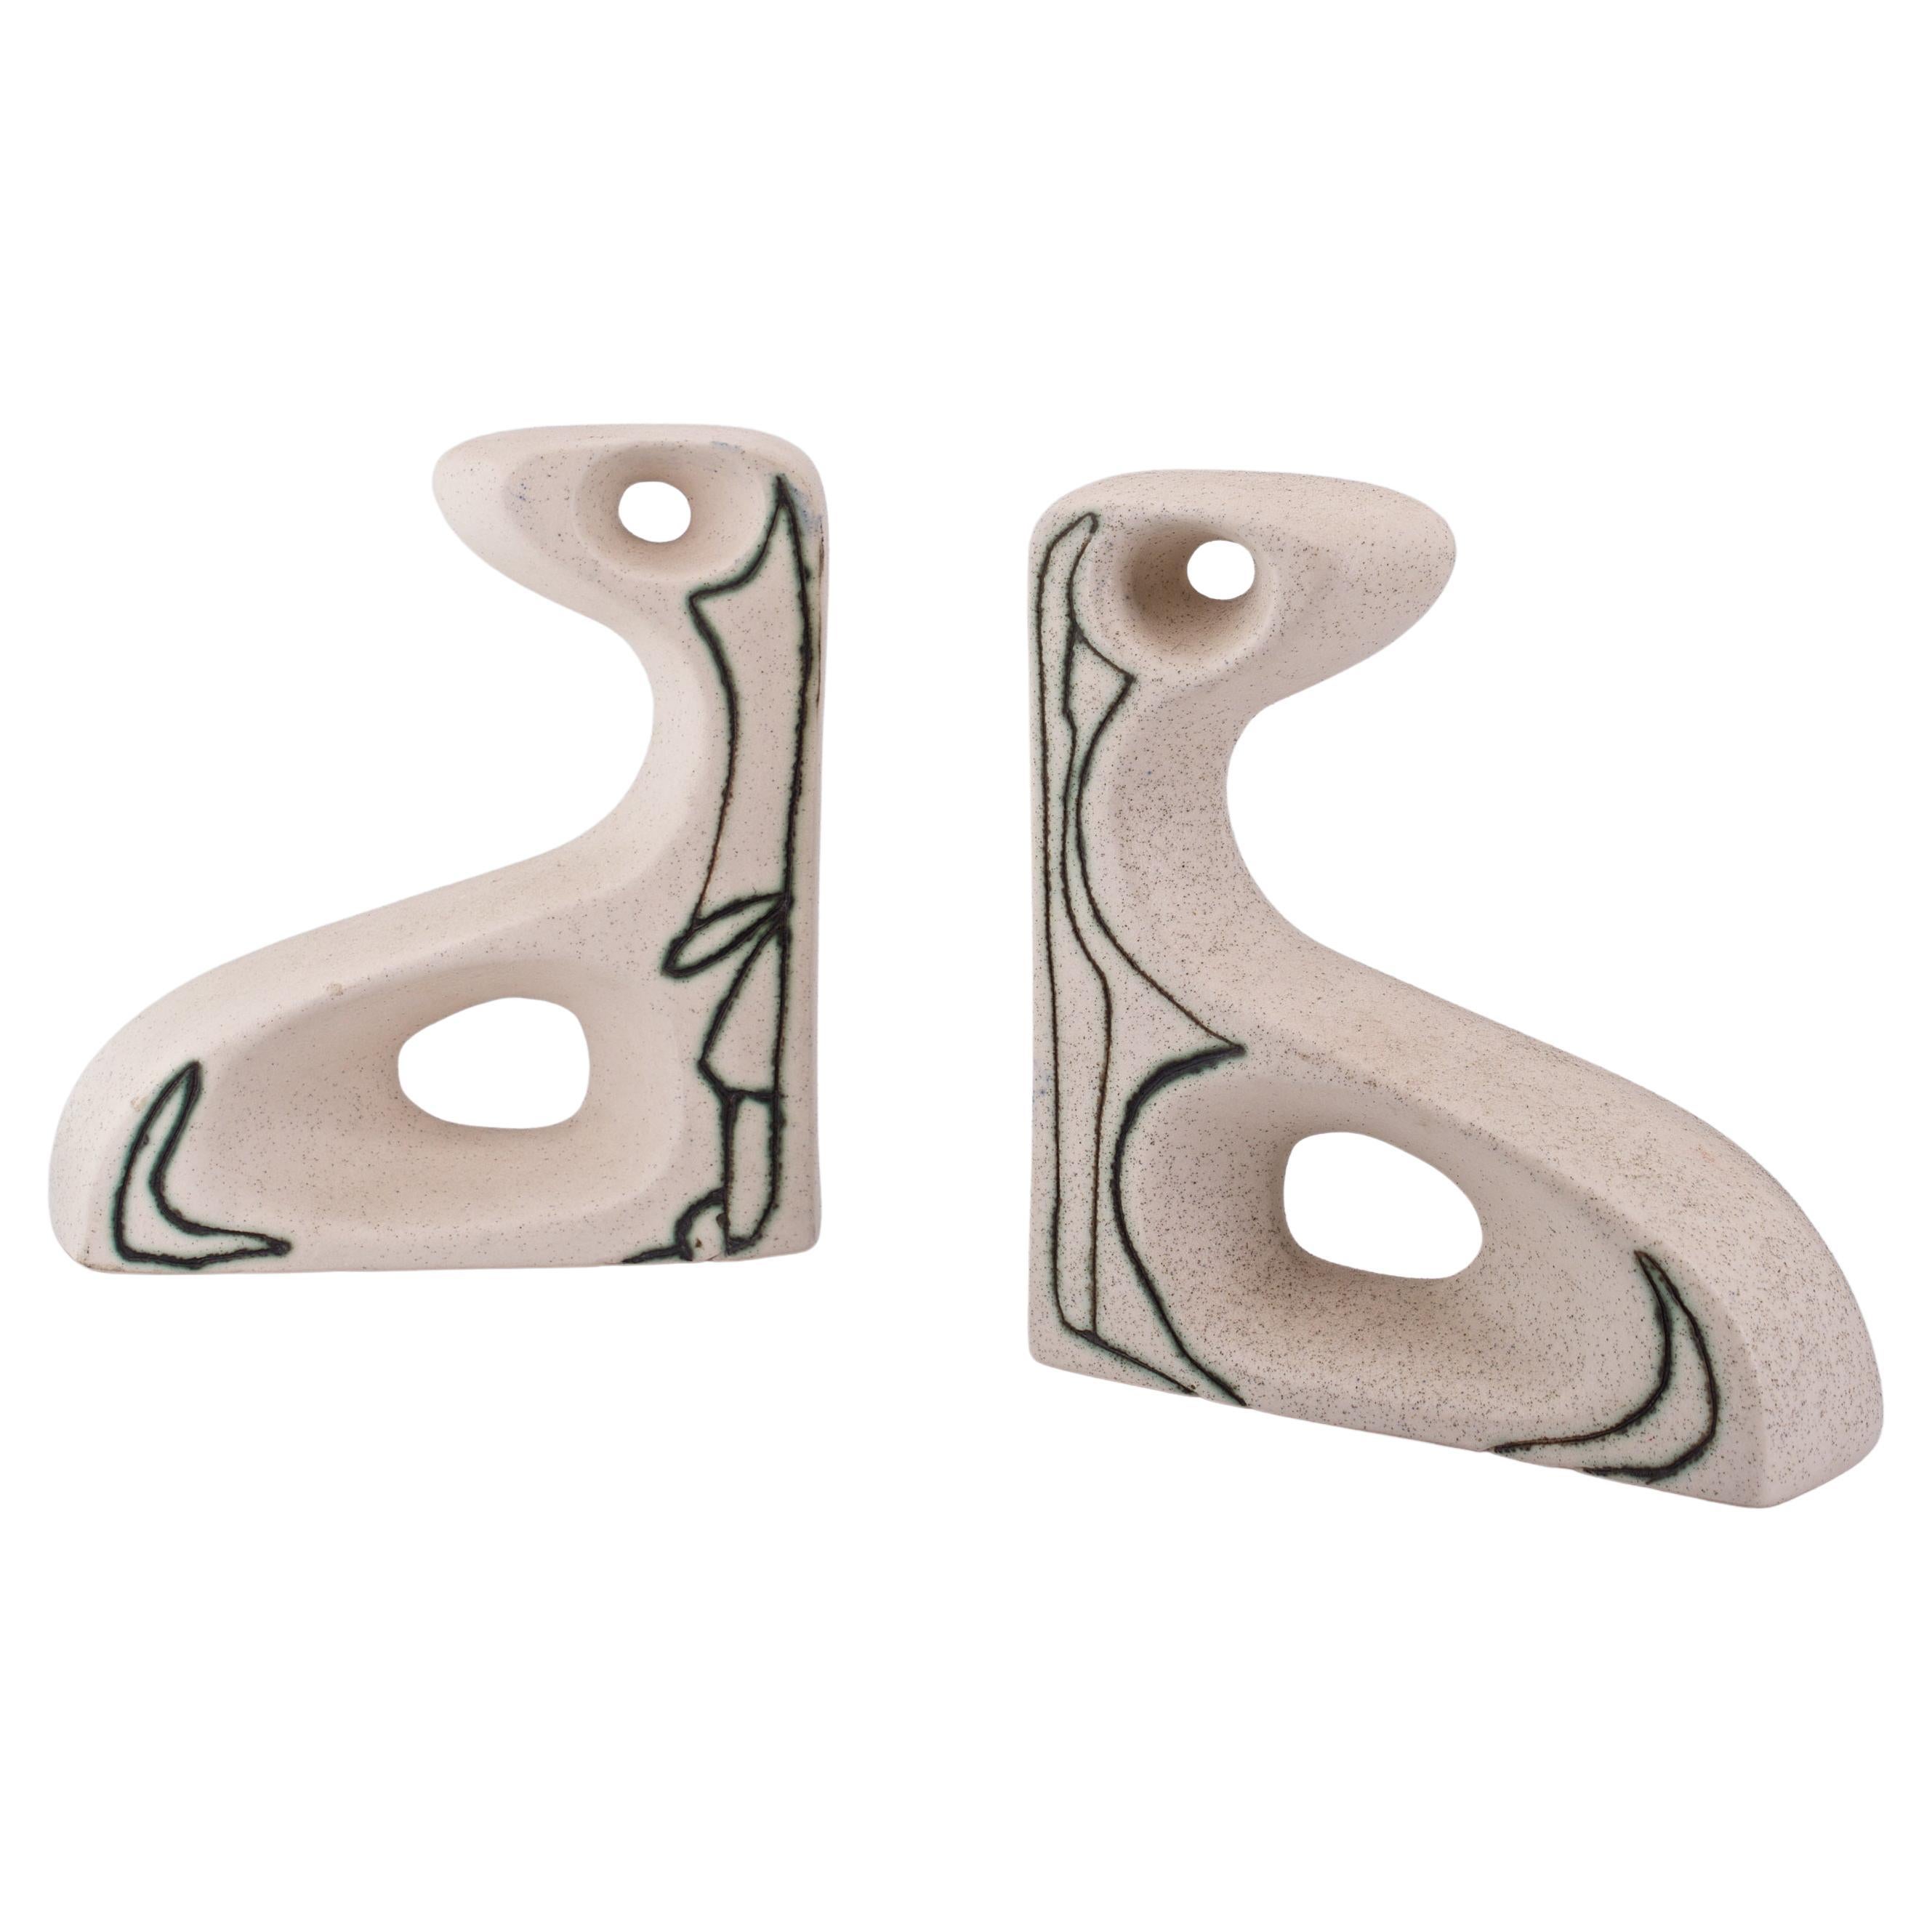 1950s Mid-Century Abstract Biomorphic Bookends For Sale